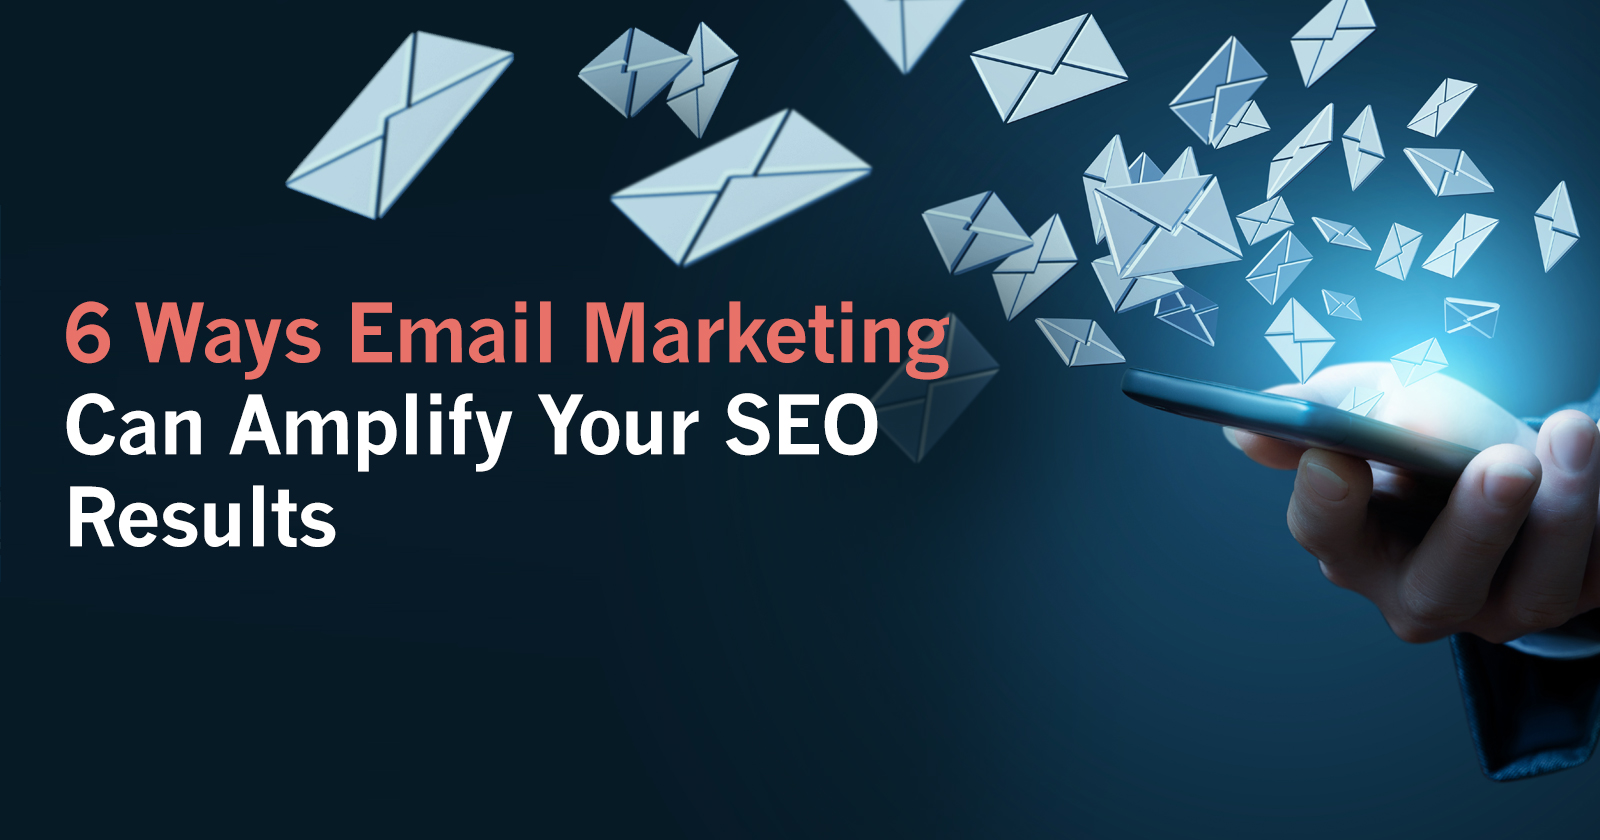 6 Ways Email Marketing Can Amplify Your SEO Results - Jason Hennessey